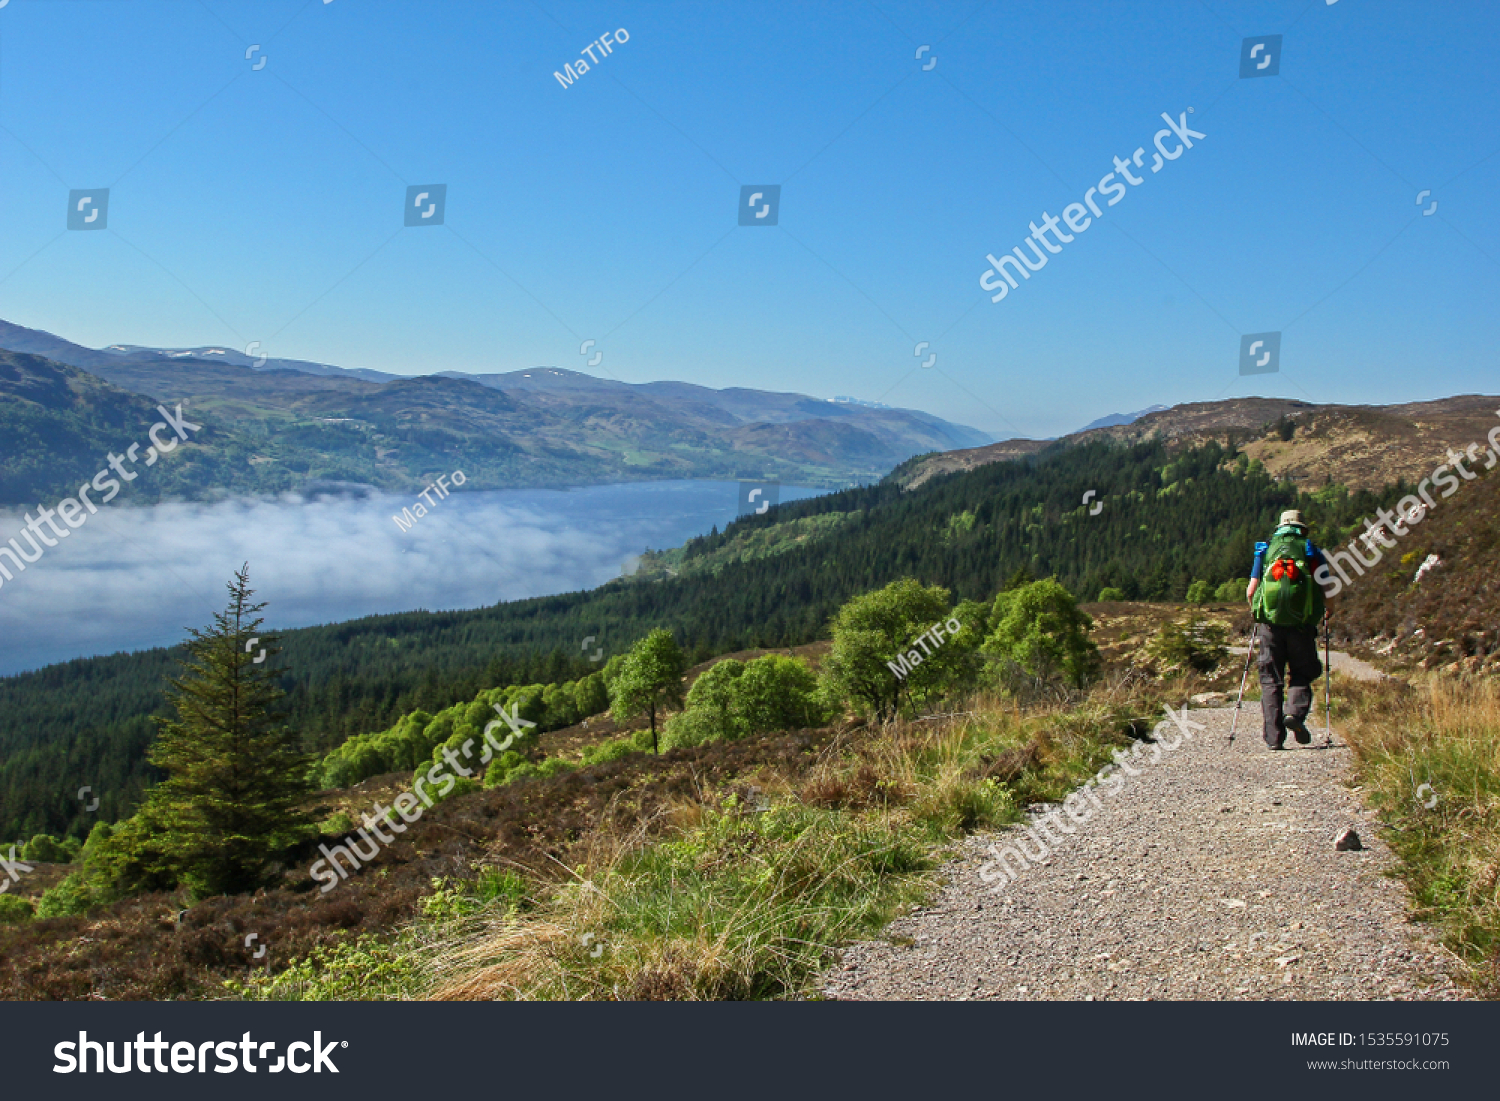 Hiker on the "Great Glen Way" in Scotland, with Scottish highlands and loch in the distance #1535591075